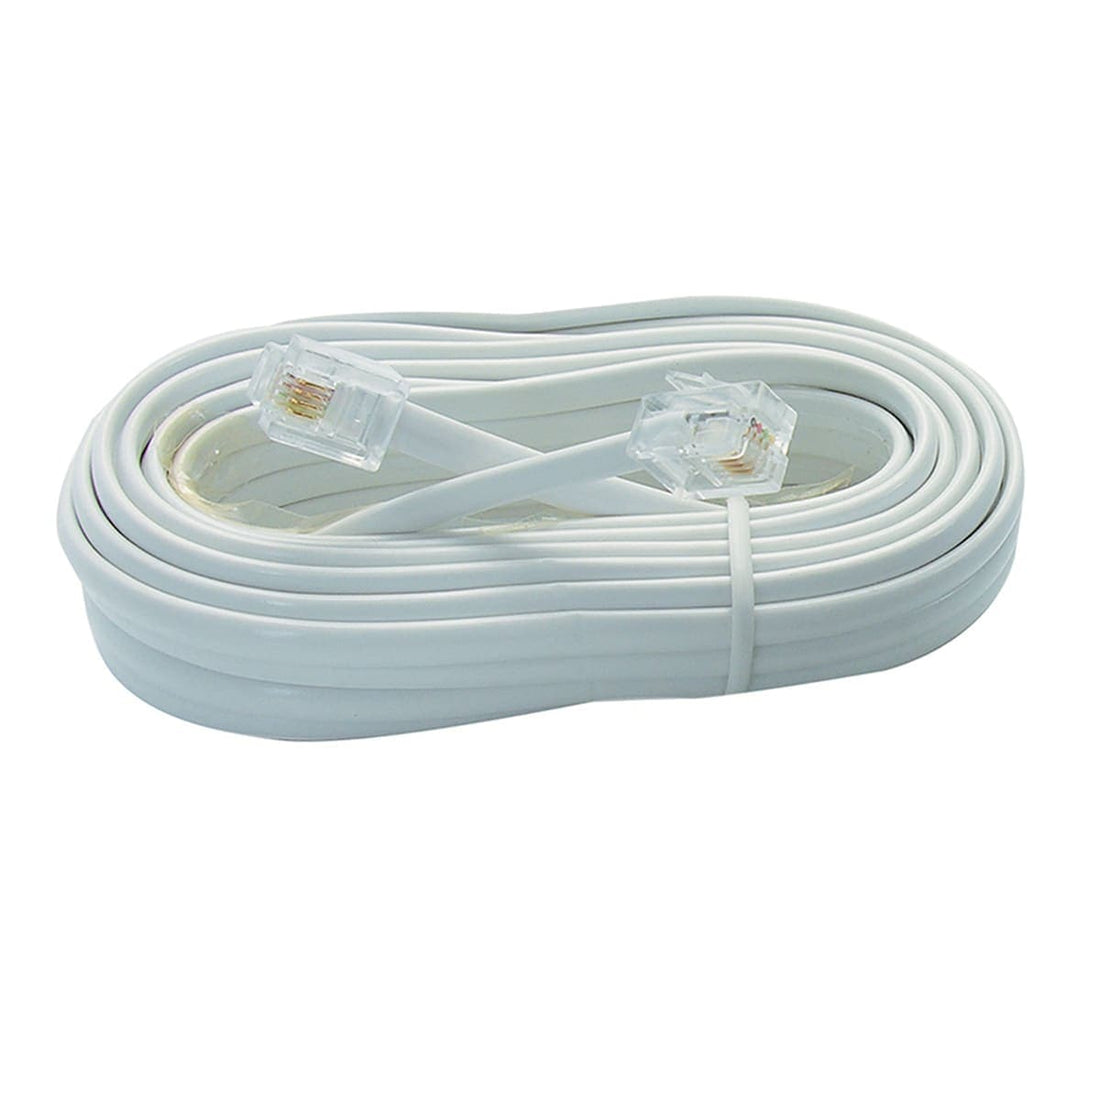 RJ11 MALE/MALE TELEPHONE EXTENSION CABLE 3MT EVOLOGY - best price from Maltashopper.com BR420230960